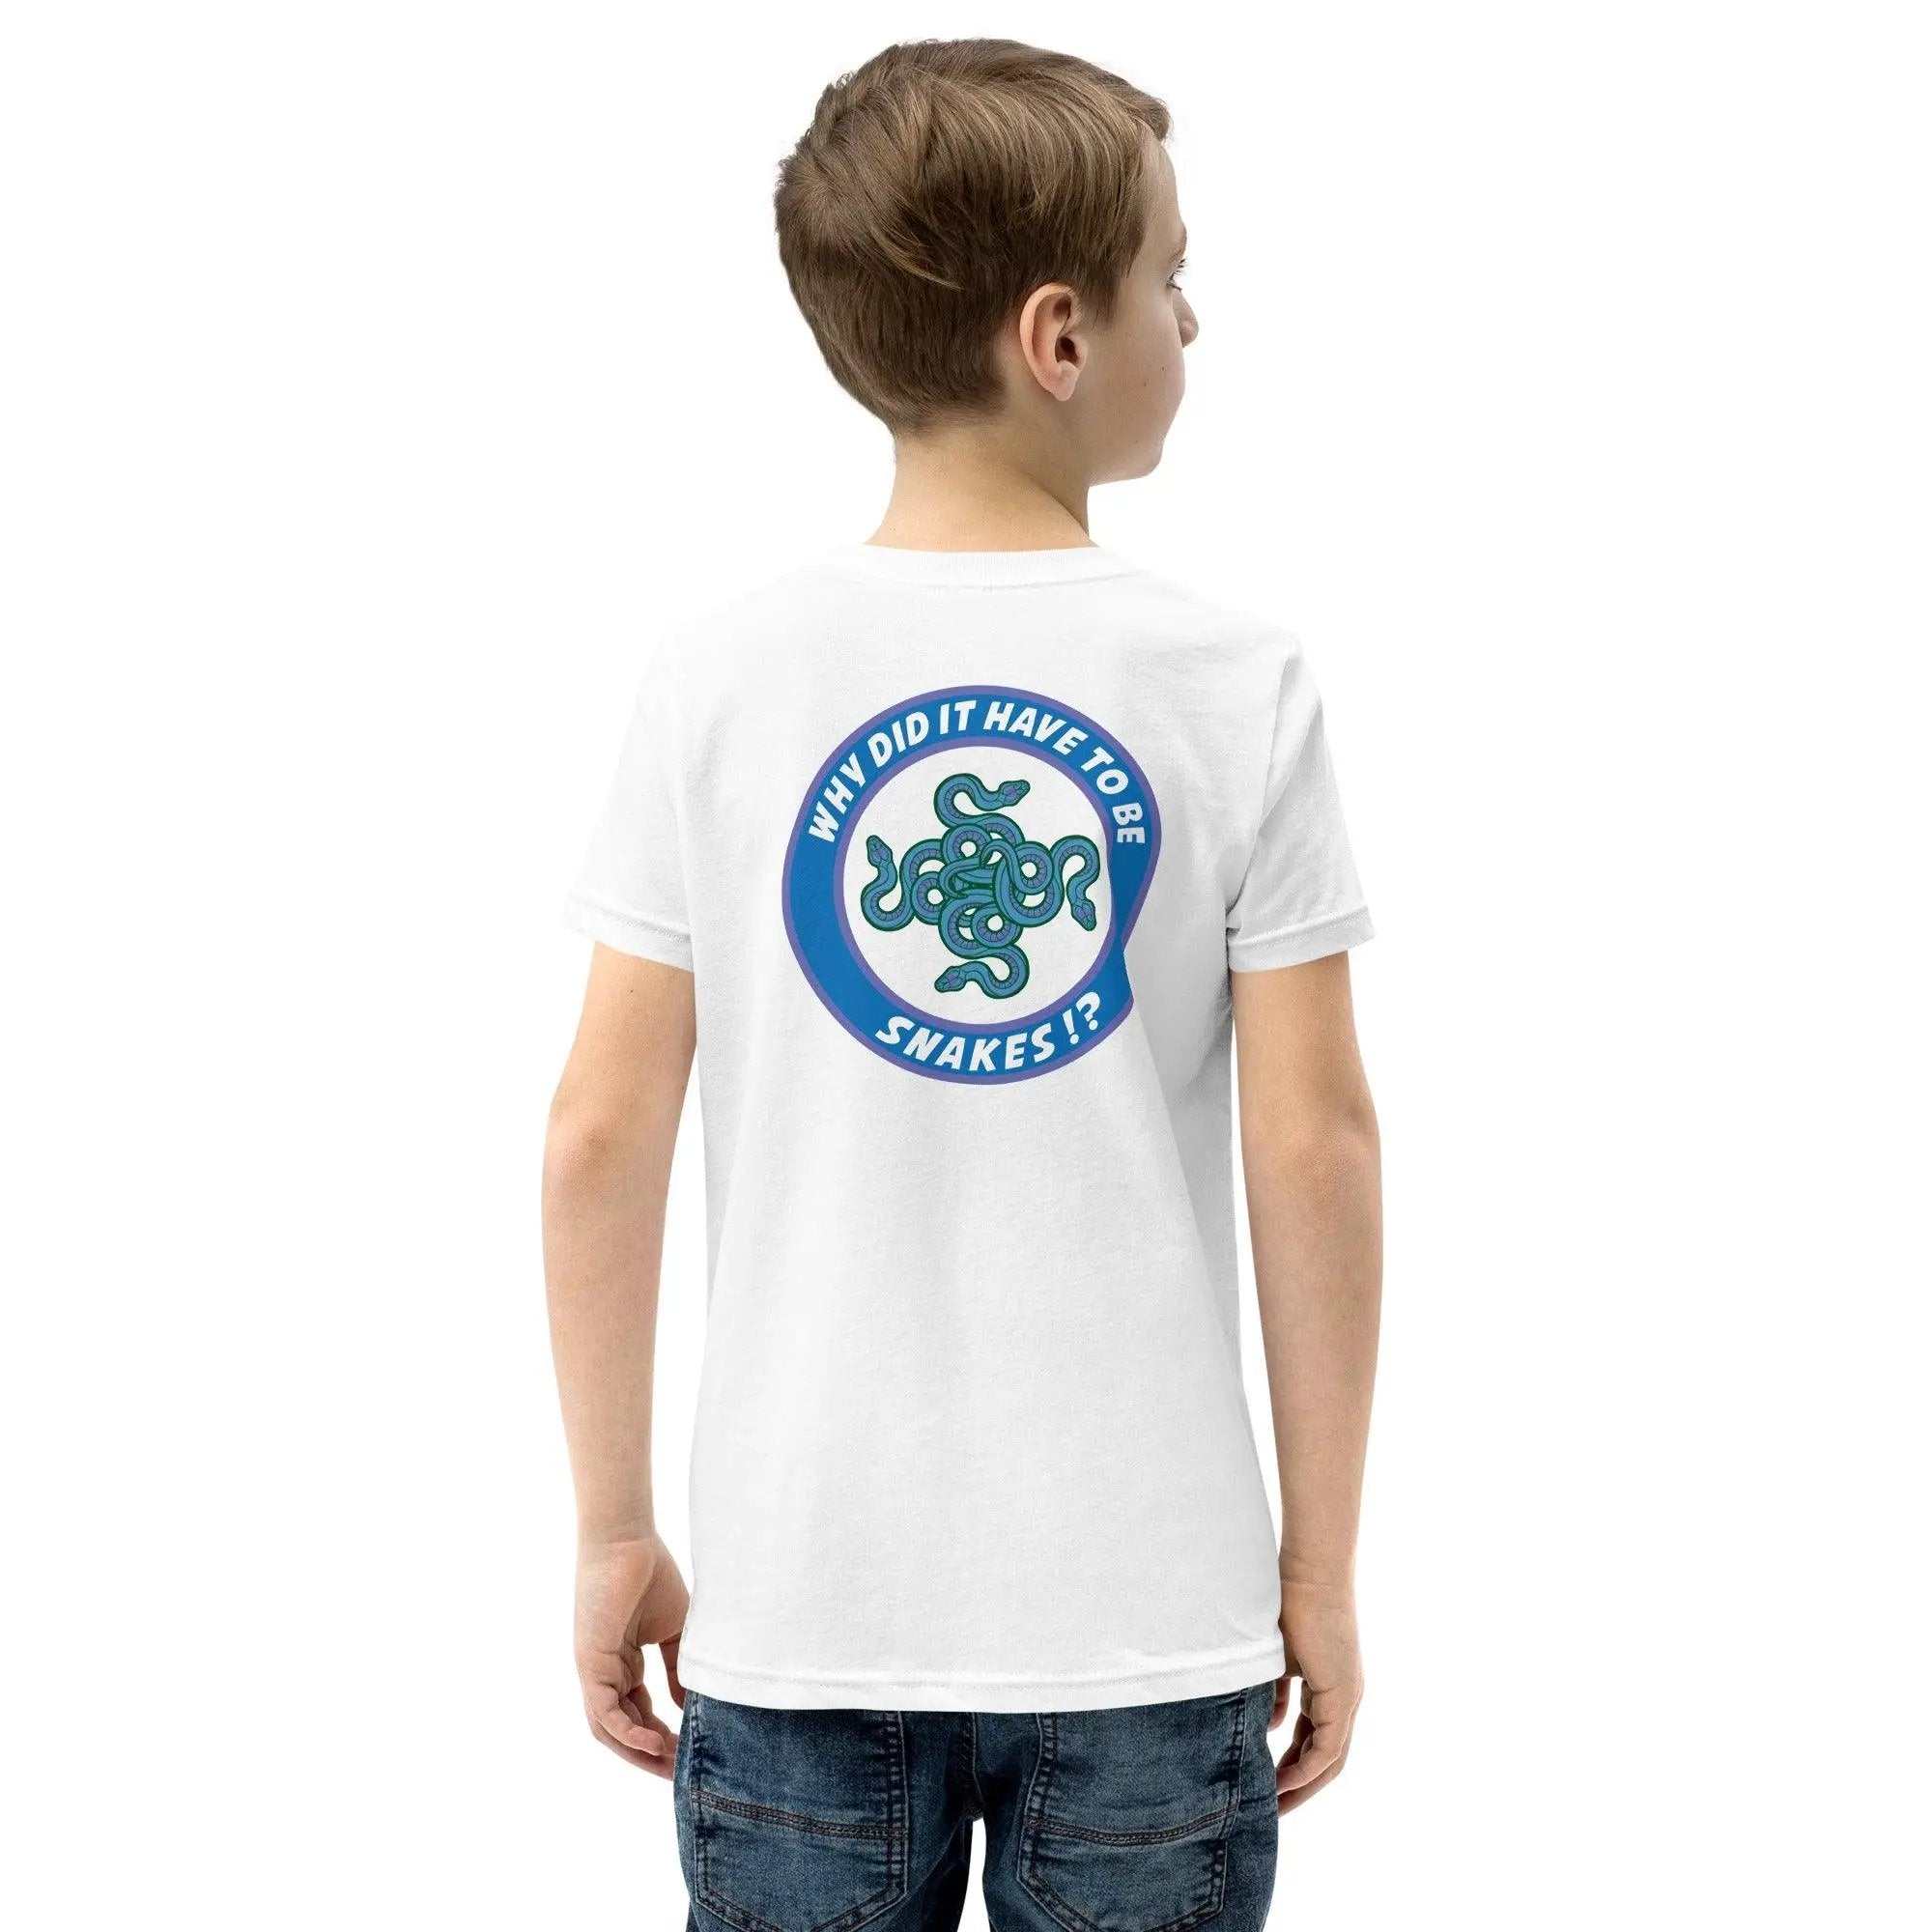 Why Did It Have To Be Snakes? Youth Short Sleeve T-Shirt VAWDesigns